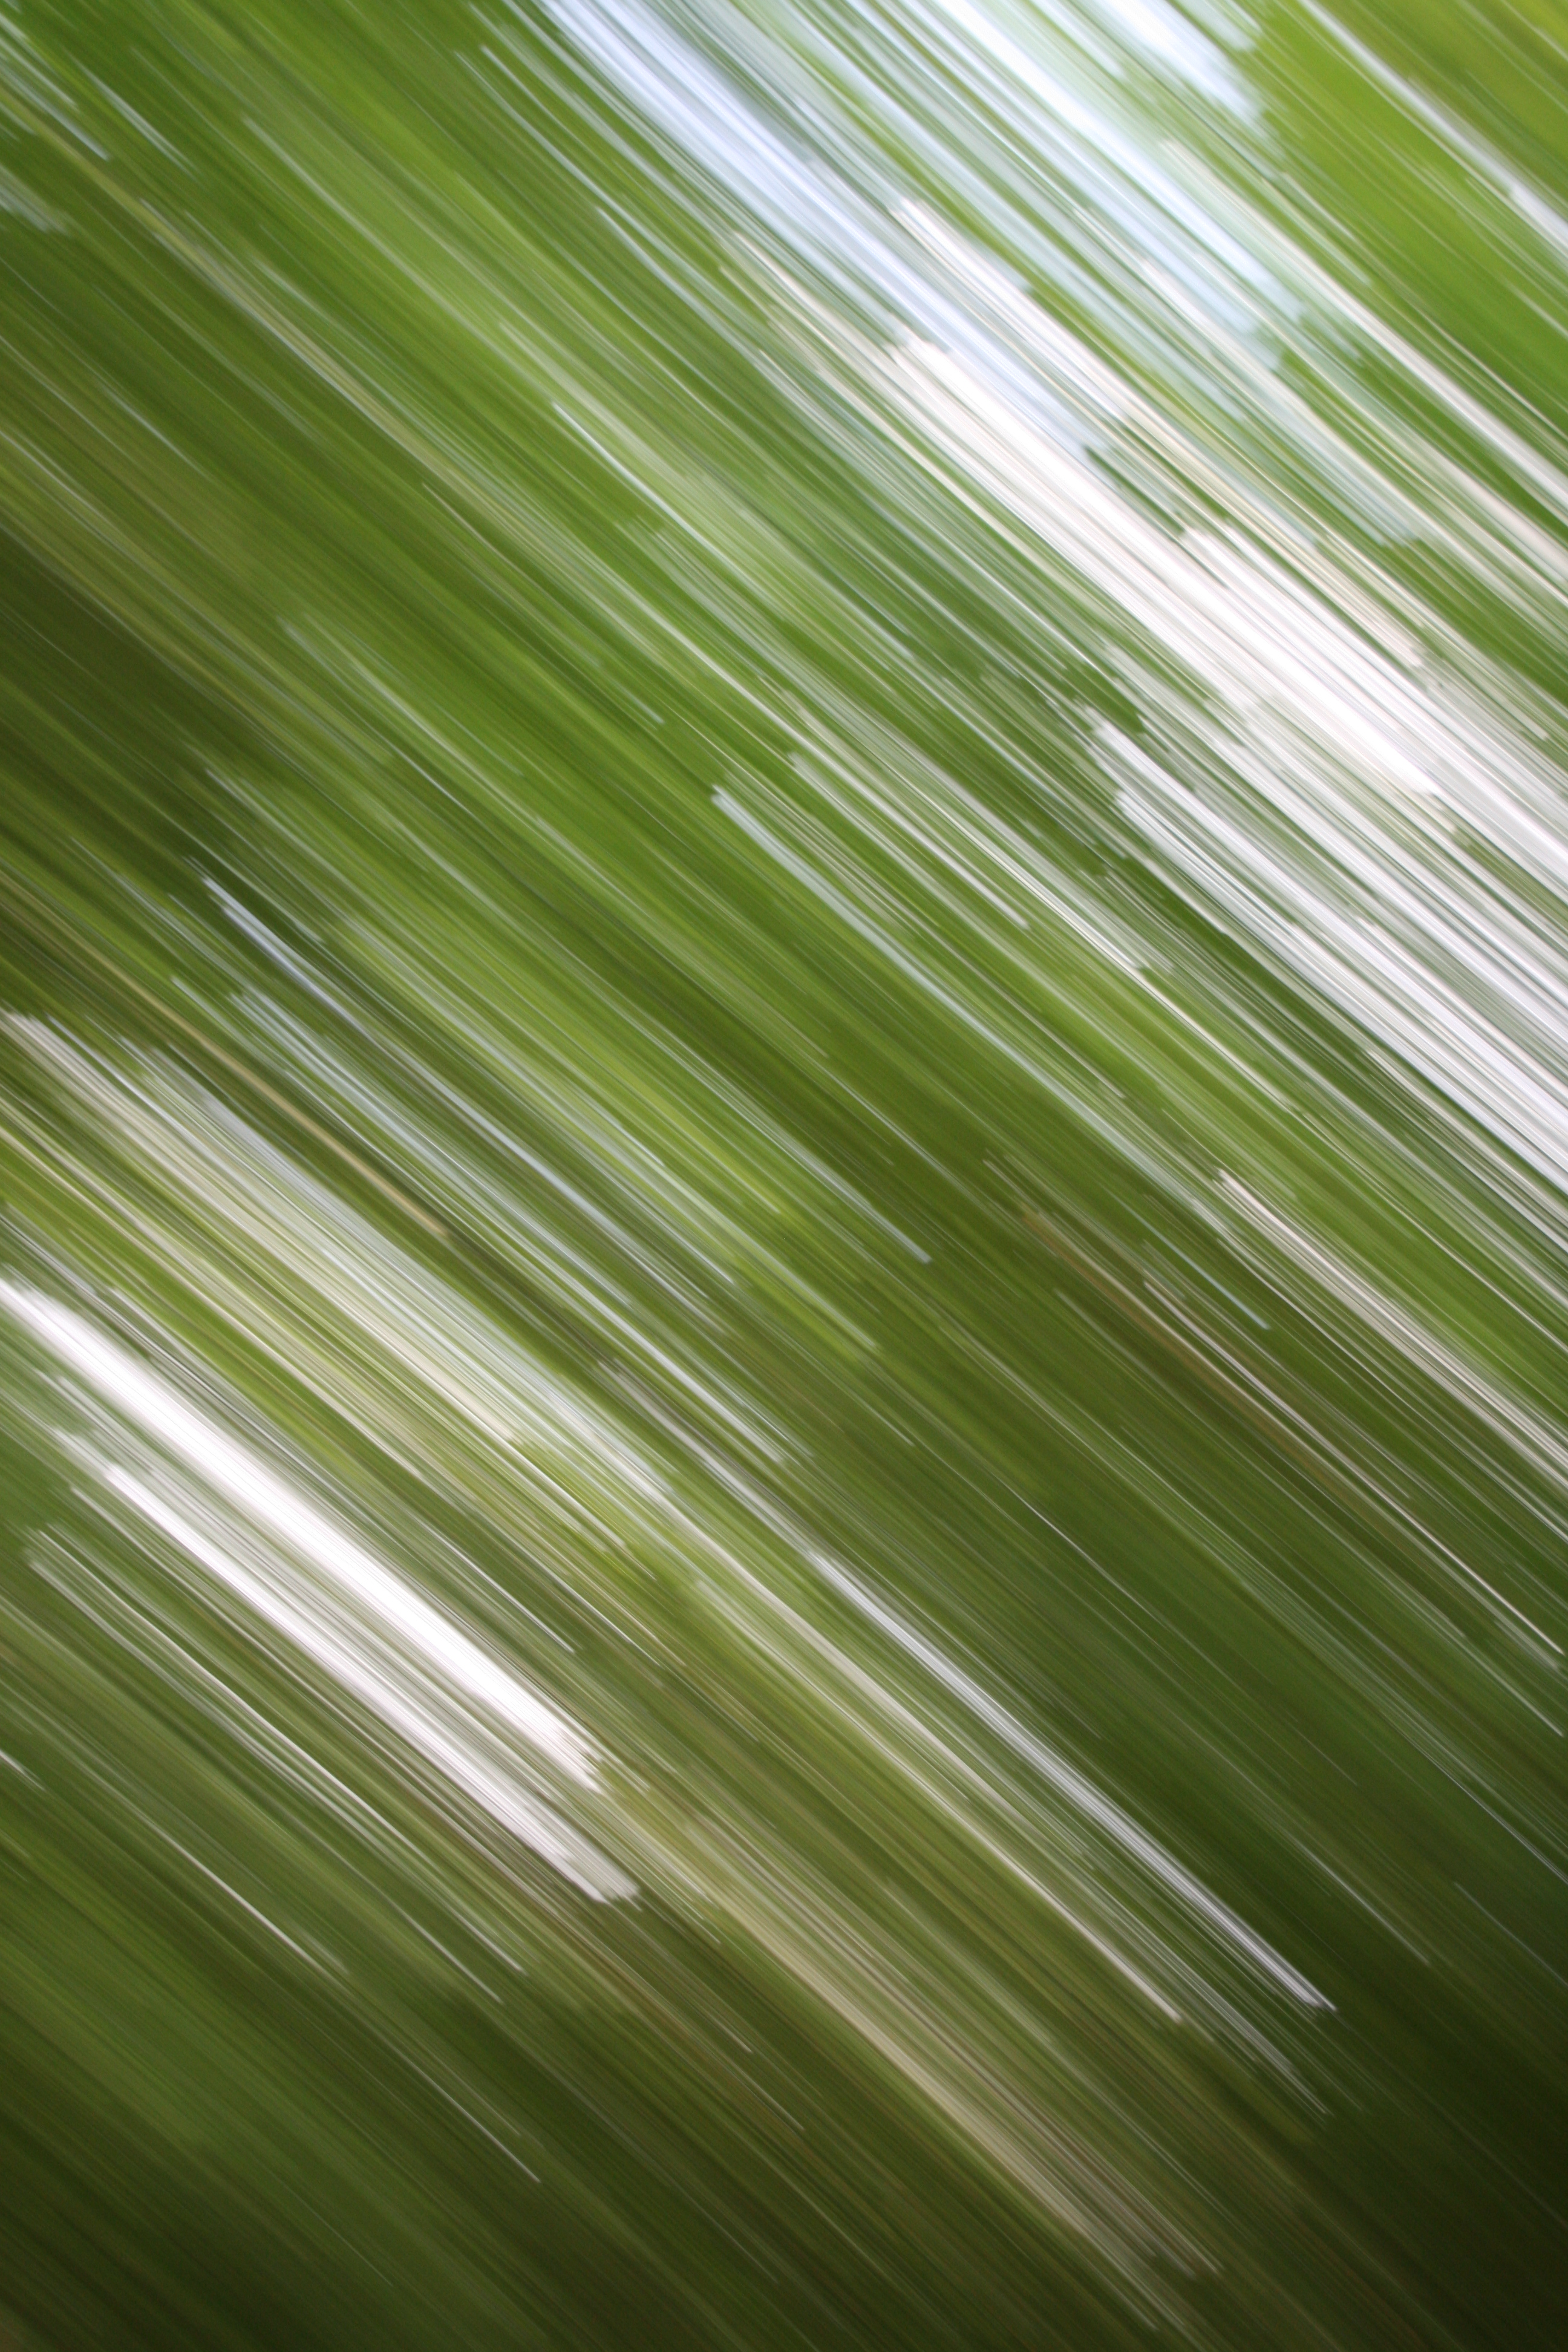 blurred, green, texture, lines, textures, fuzzy, smeared